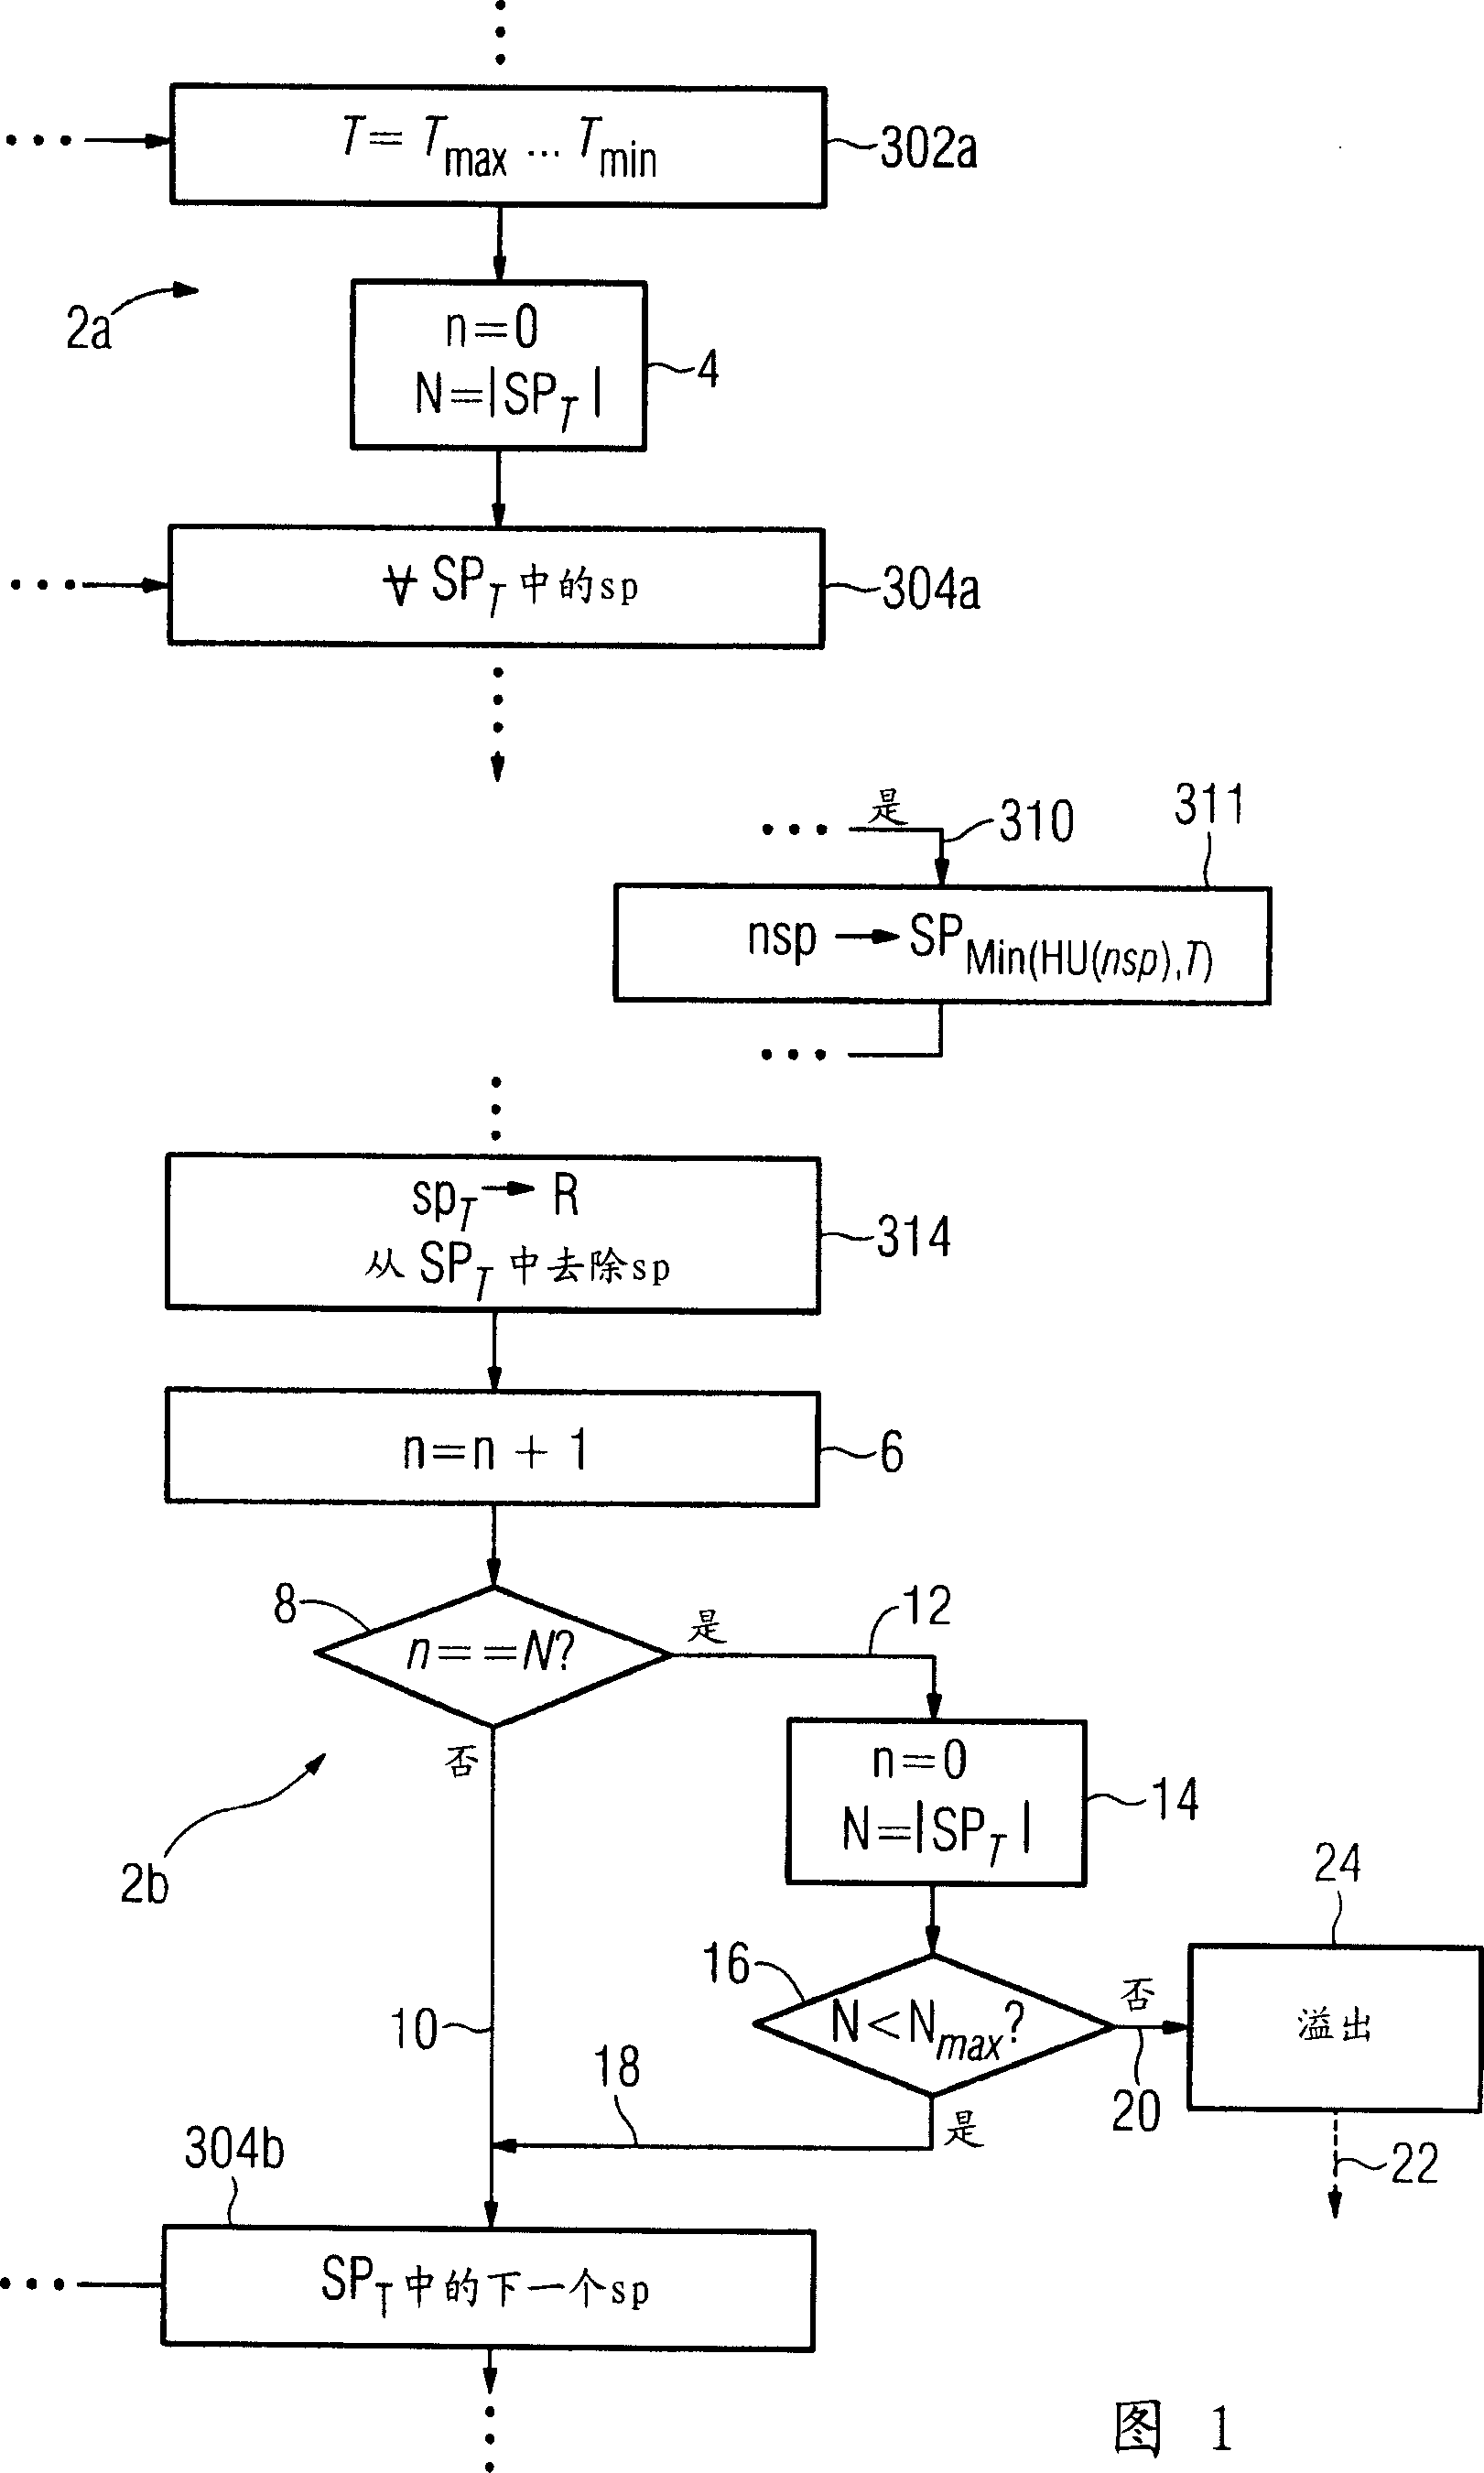 Method for identification of a contrasted blood vessel in digital image data